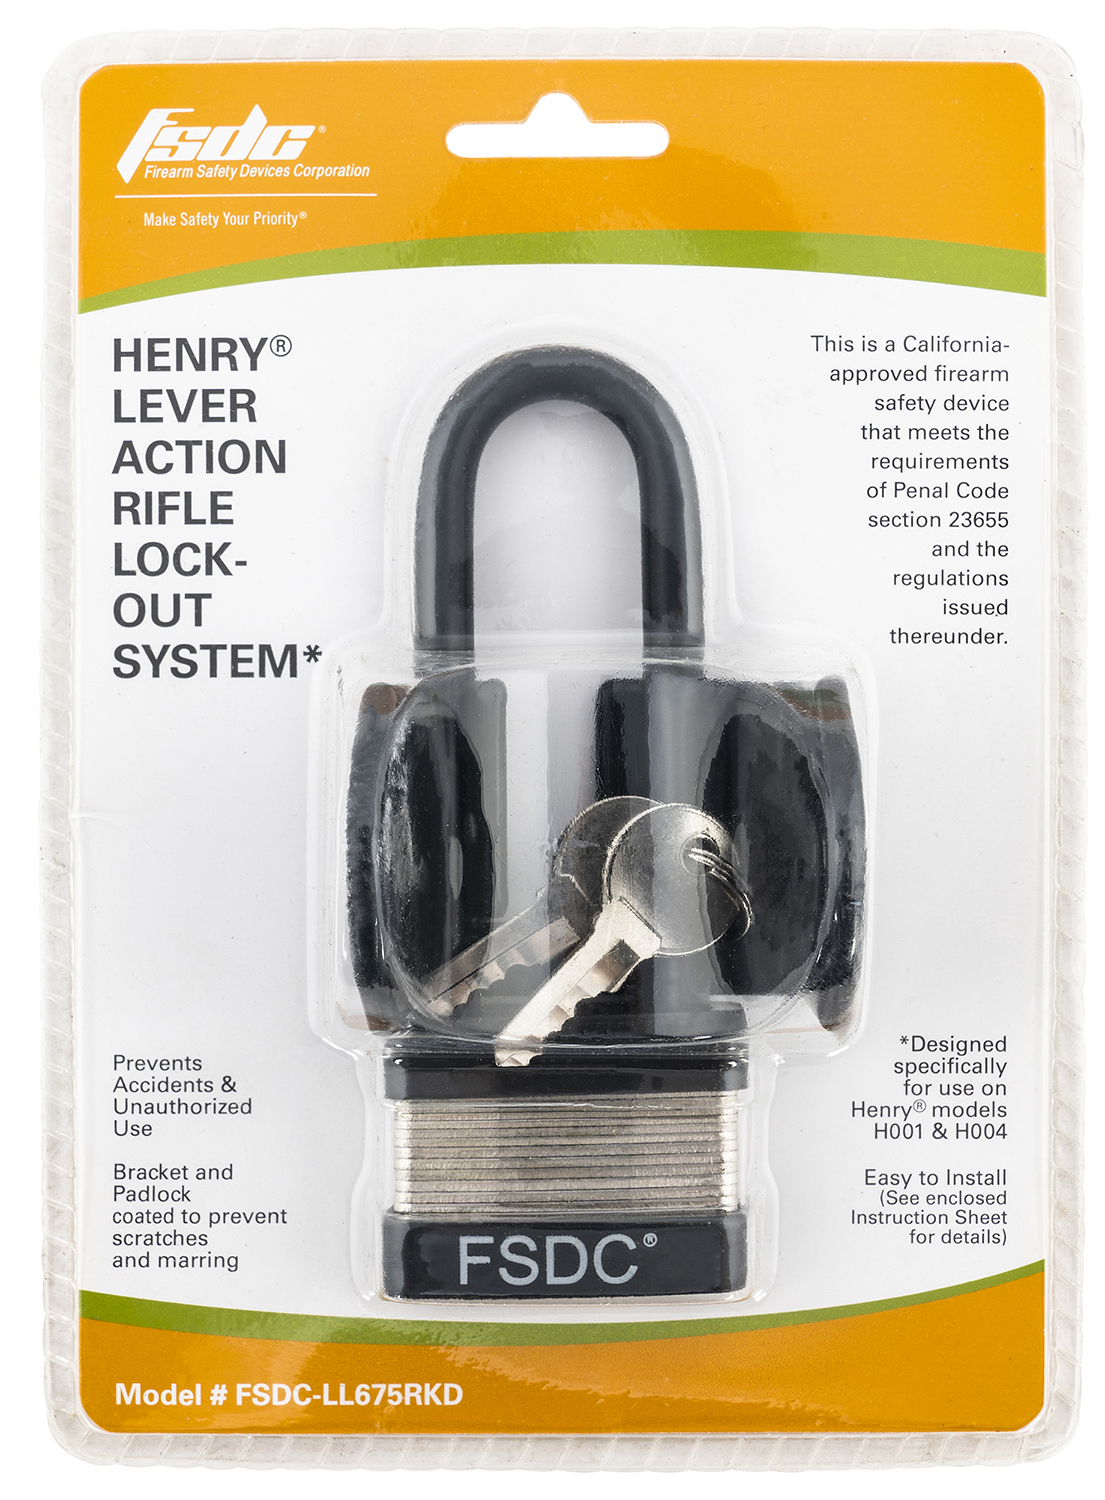 Firearm Safety Devices Corporation Tl3050rkd FSDC Keyed Trigger Lock Ca Key for sale online 